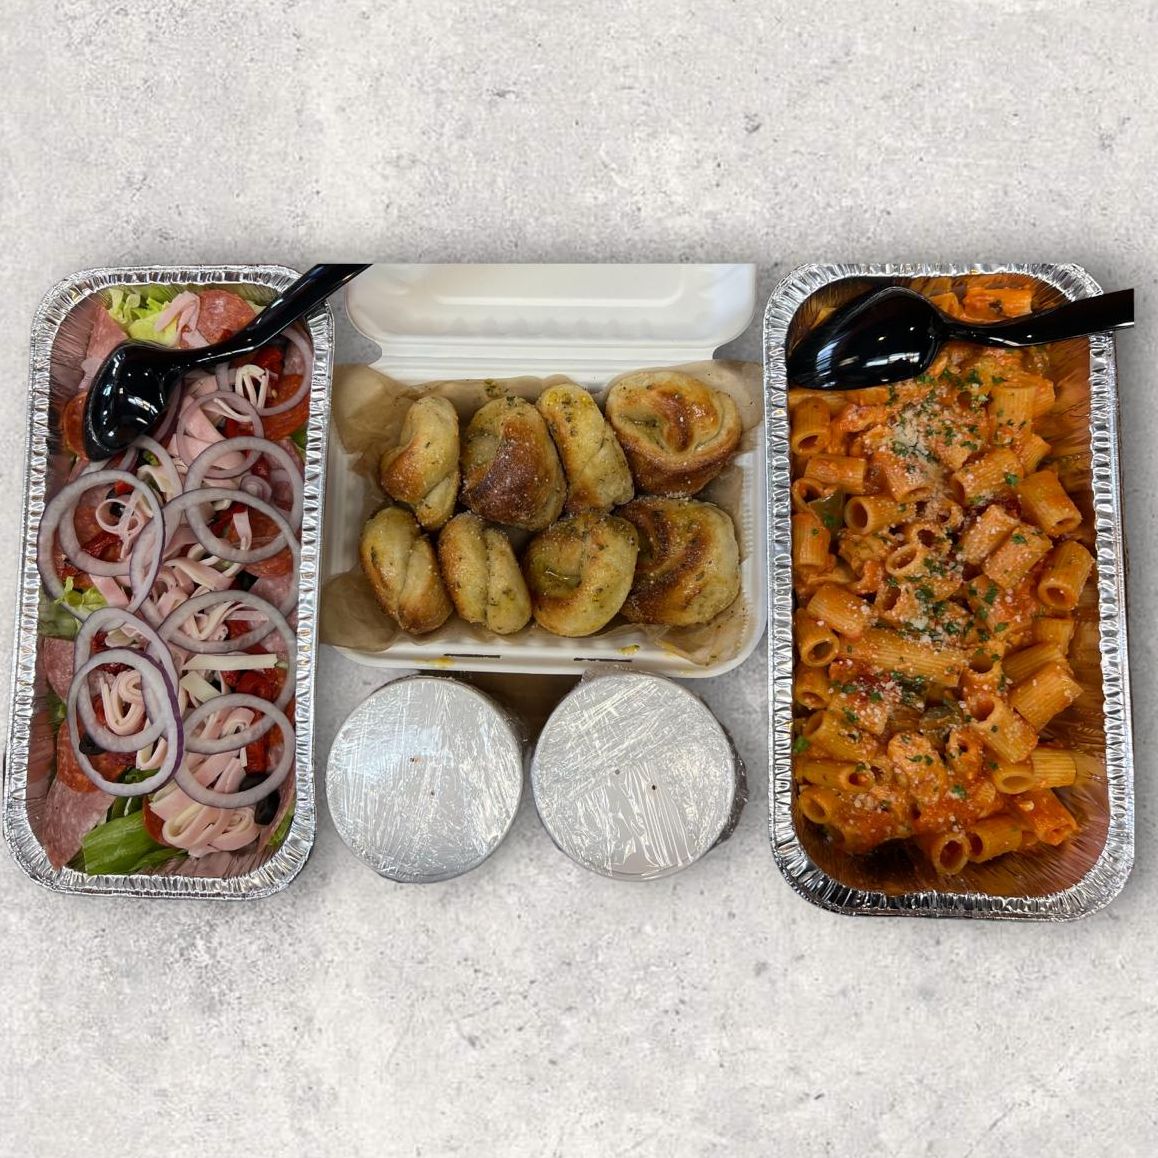 Charlie Box   Family Style Takeout 1920w 